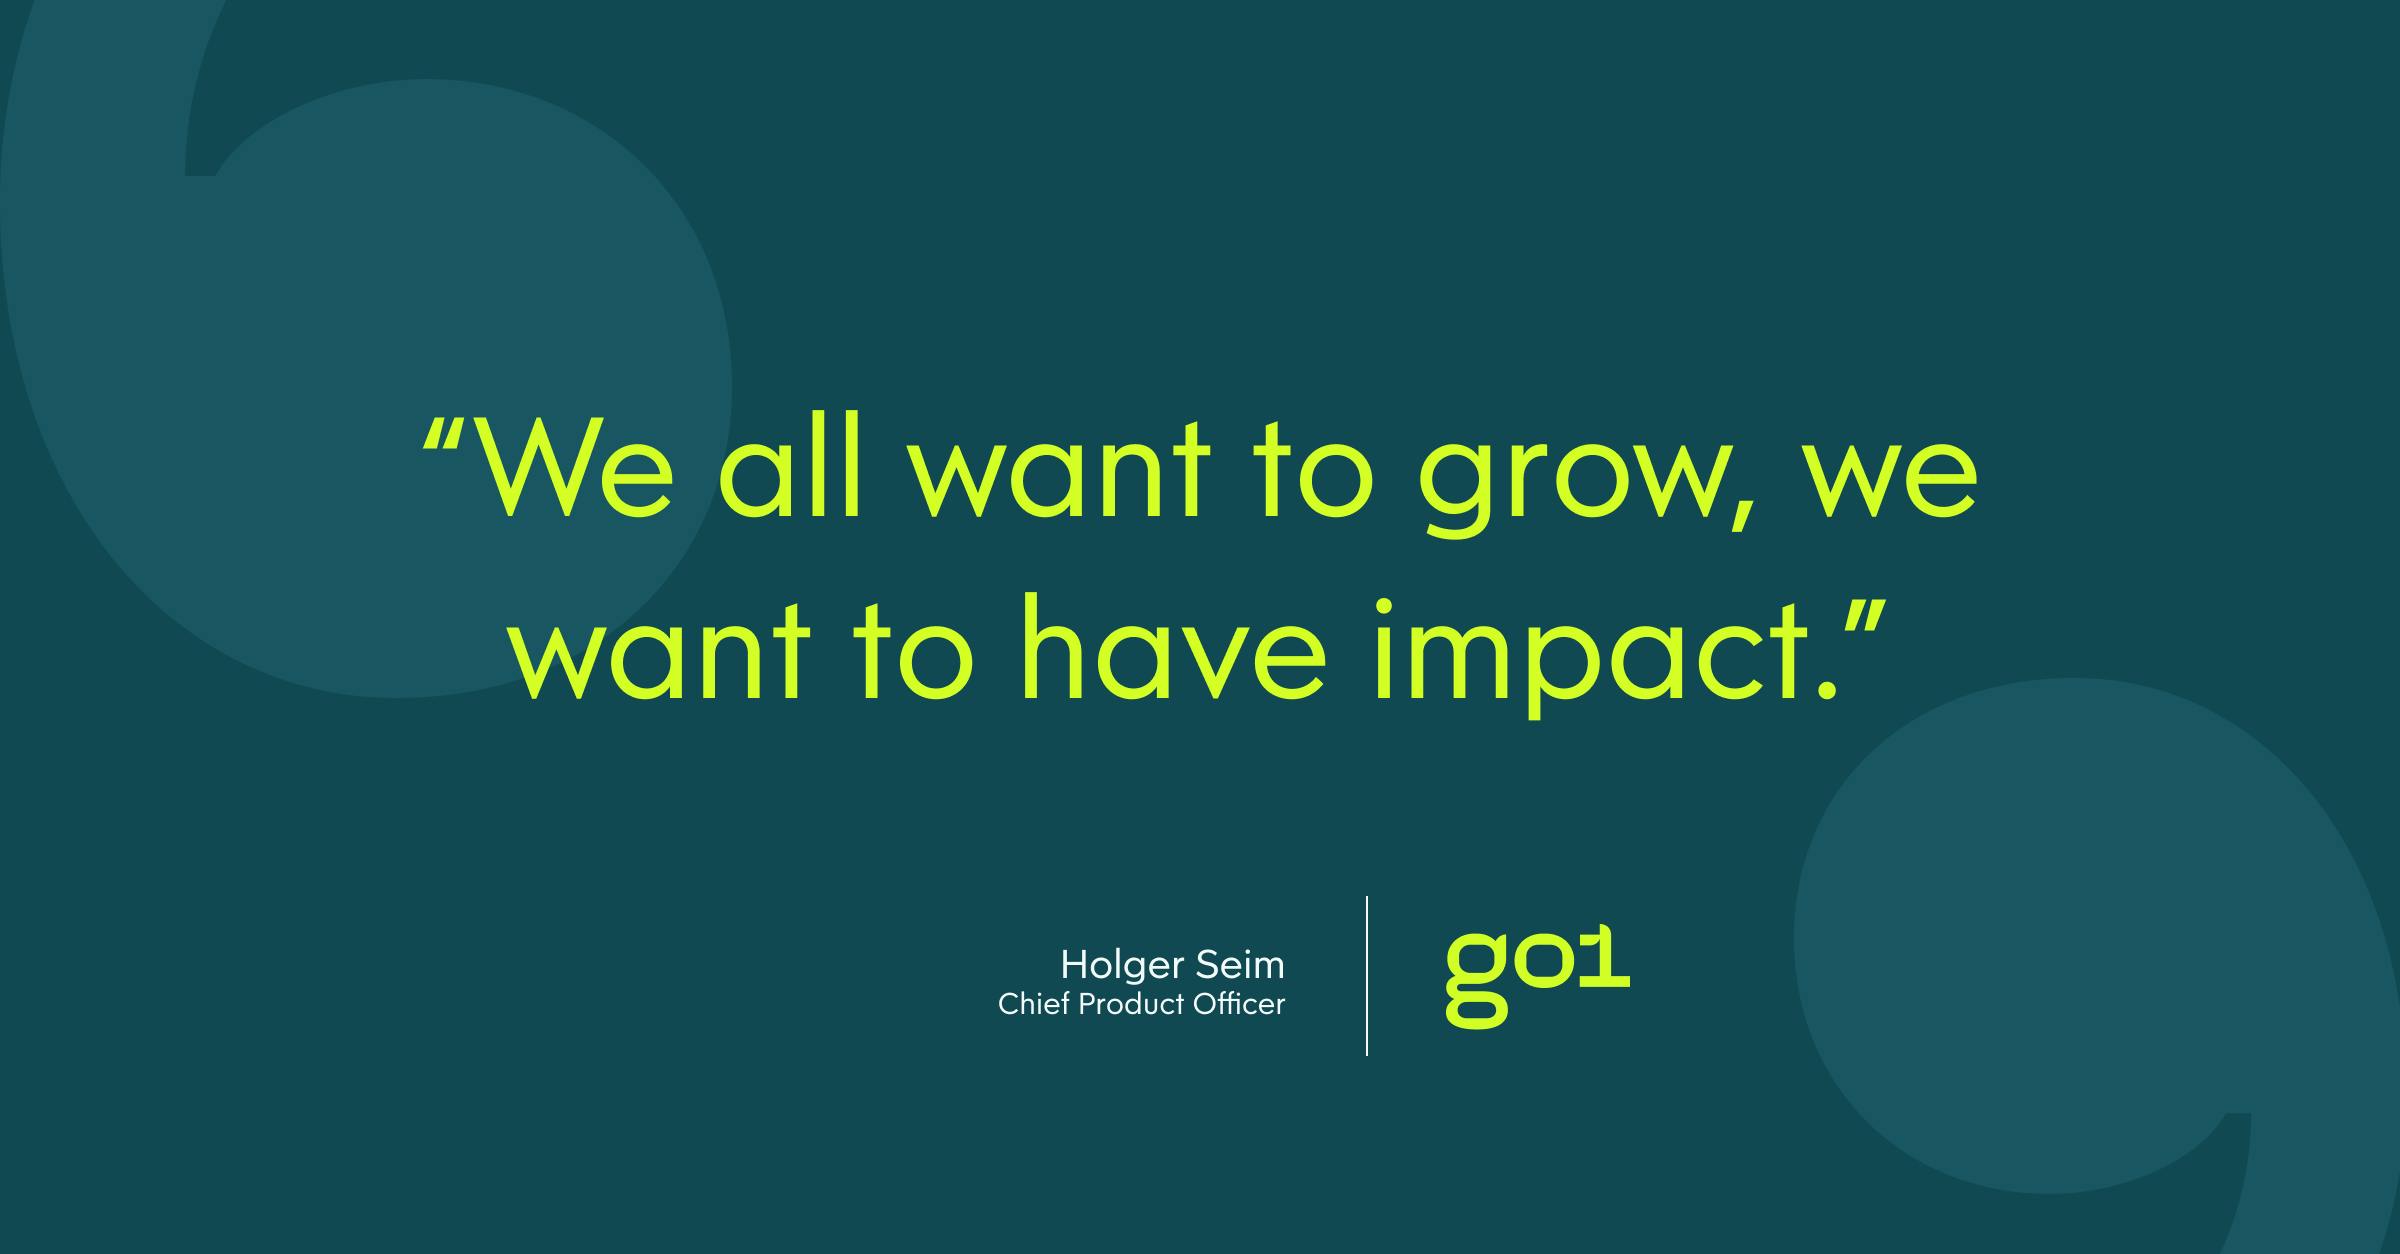 “We all want to grow, we want to have impact.” - Holger Seim, Go1